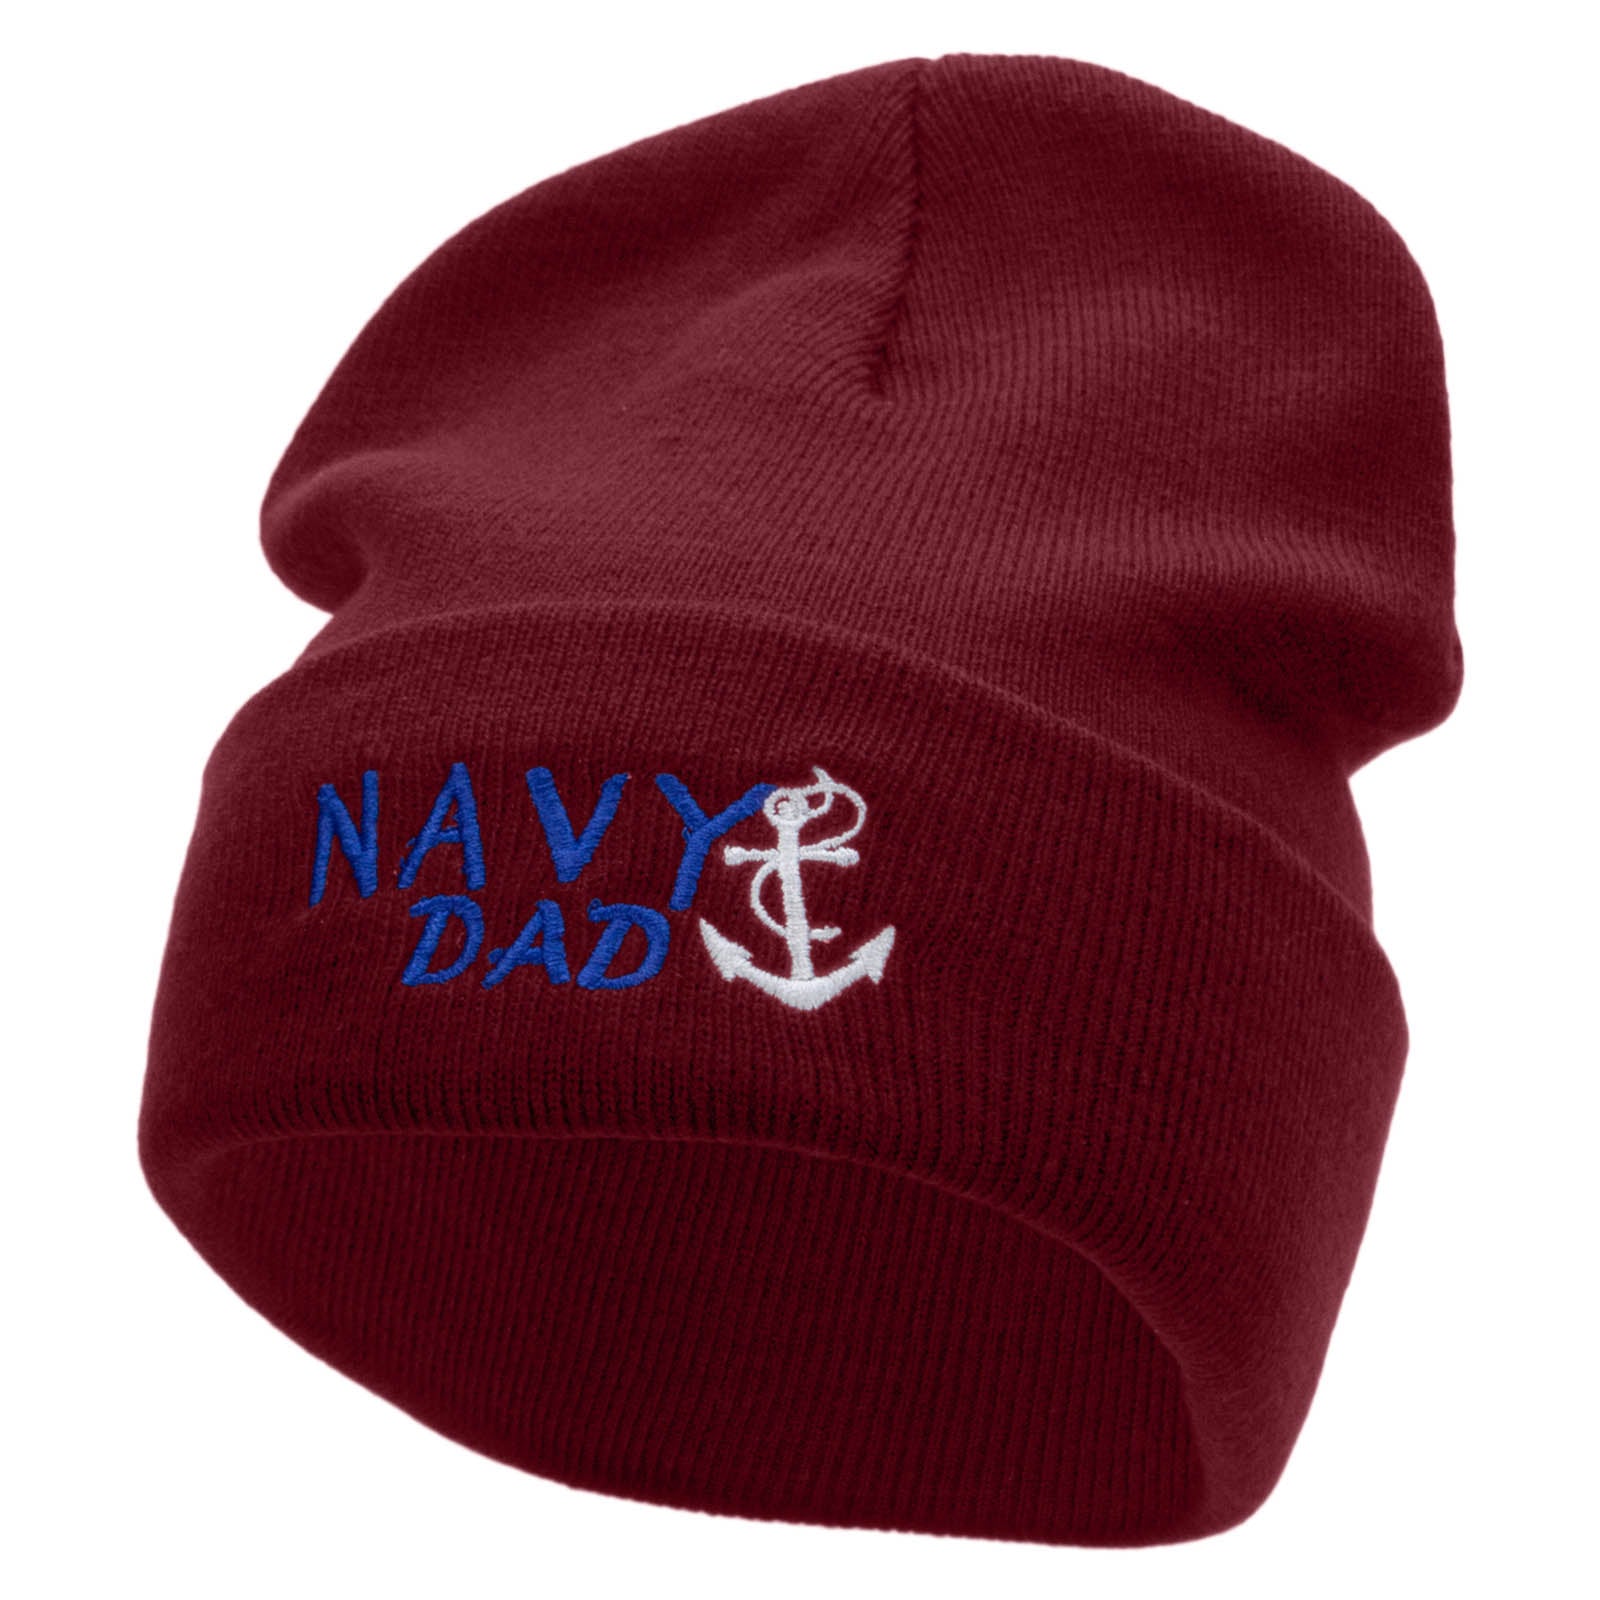 Navy Dad Embroidered 12 Inch Long Knitted Beanie - Maroon OSFM